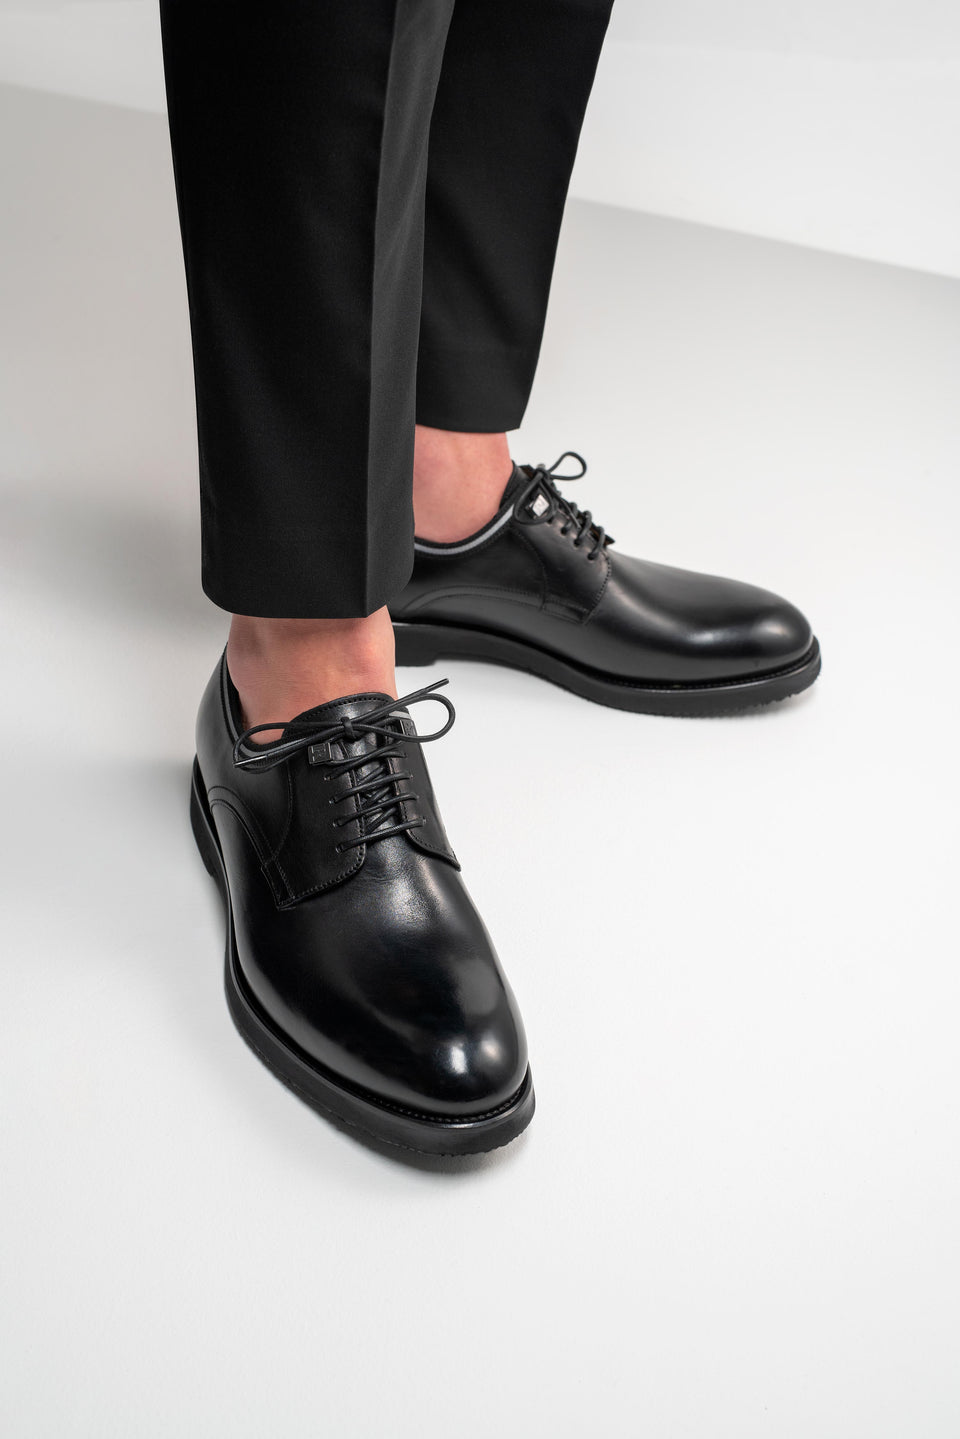 most comfortable black leather shoes